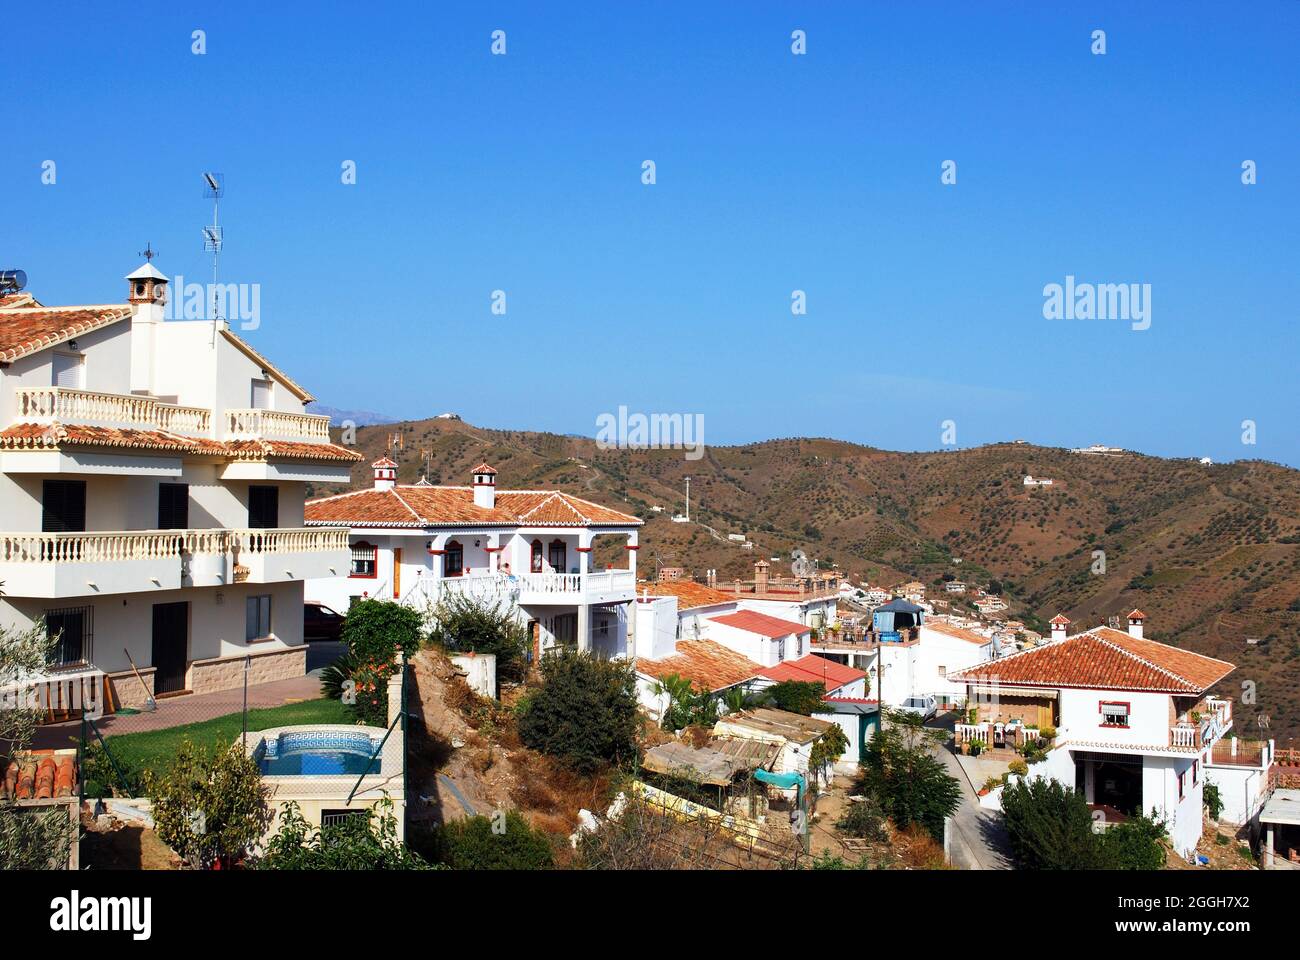 View of the whitewashed village (pueblo blanco) with mountains to the rerar, Moclinejo, Spain. Stock Photo